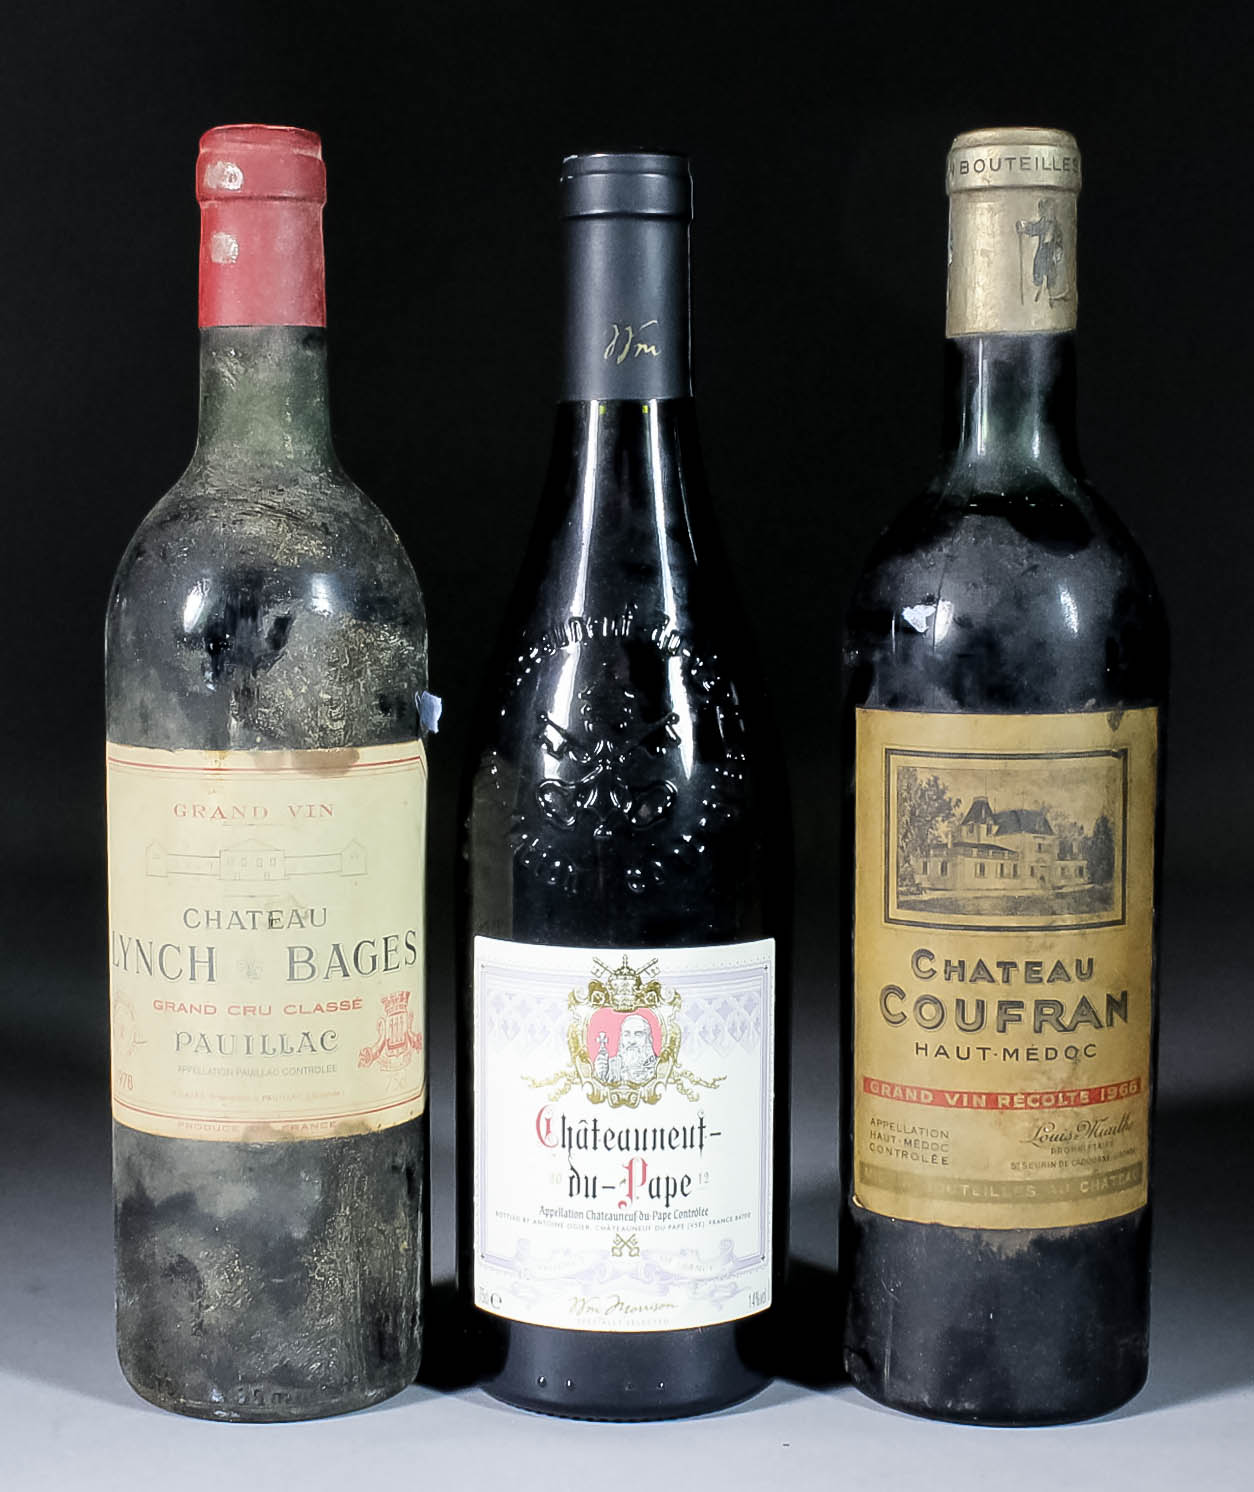 A bottle of 1978 Chateau Lynch Bages (Grand Cru Classe Pauillac), bottle of 1979 Chateau Lafite